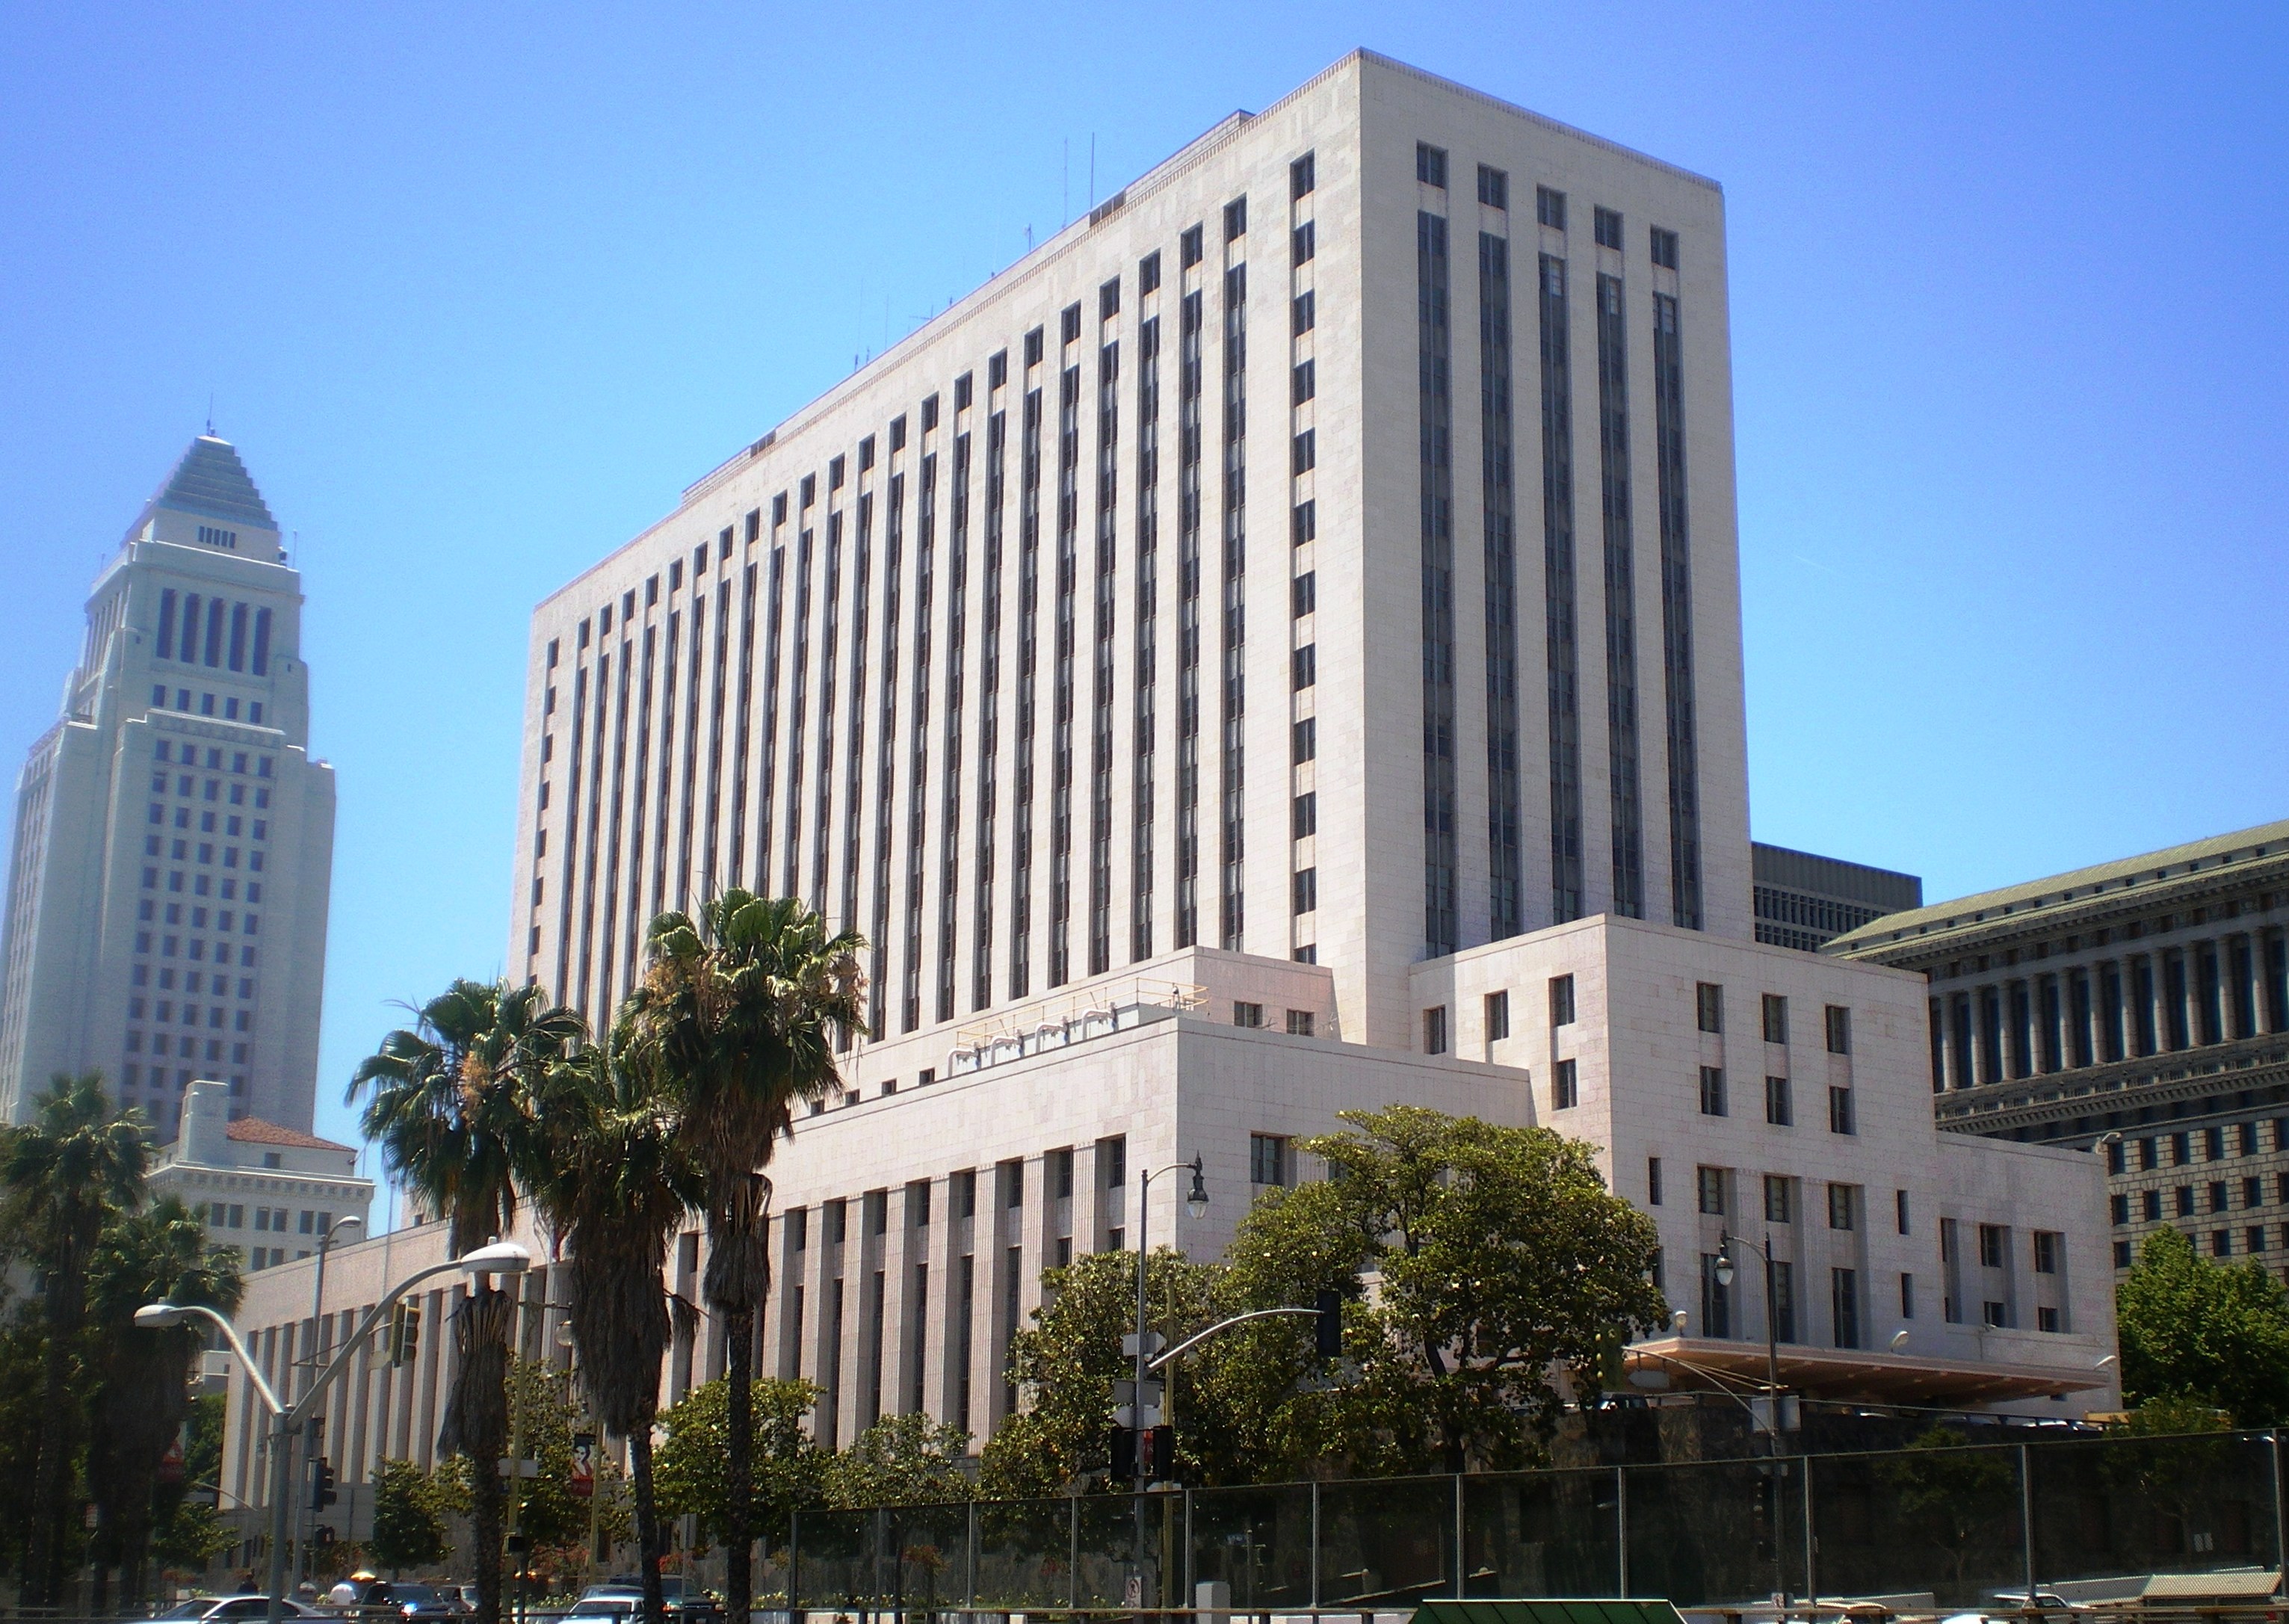 United States District Court for the Central District of California